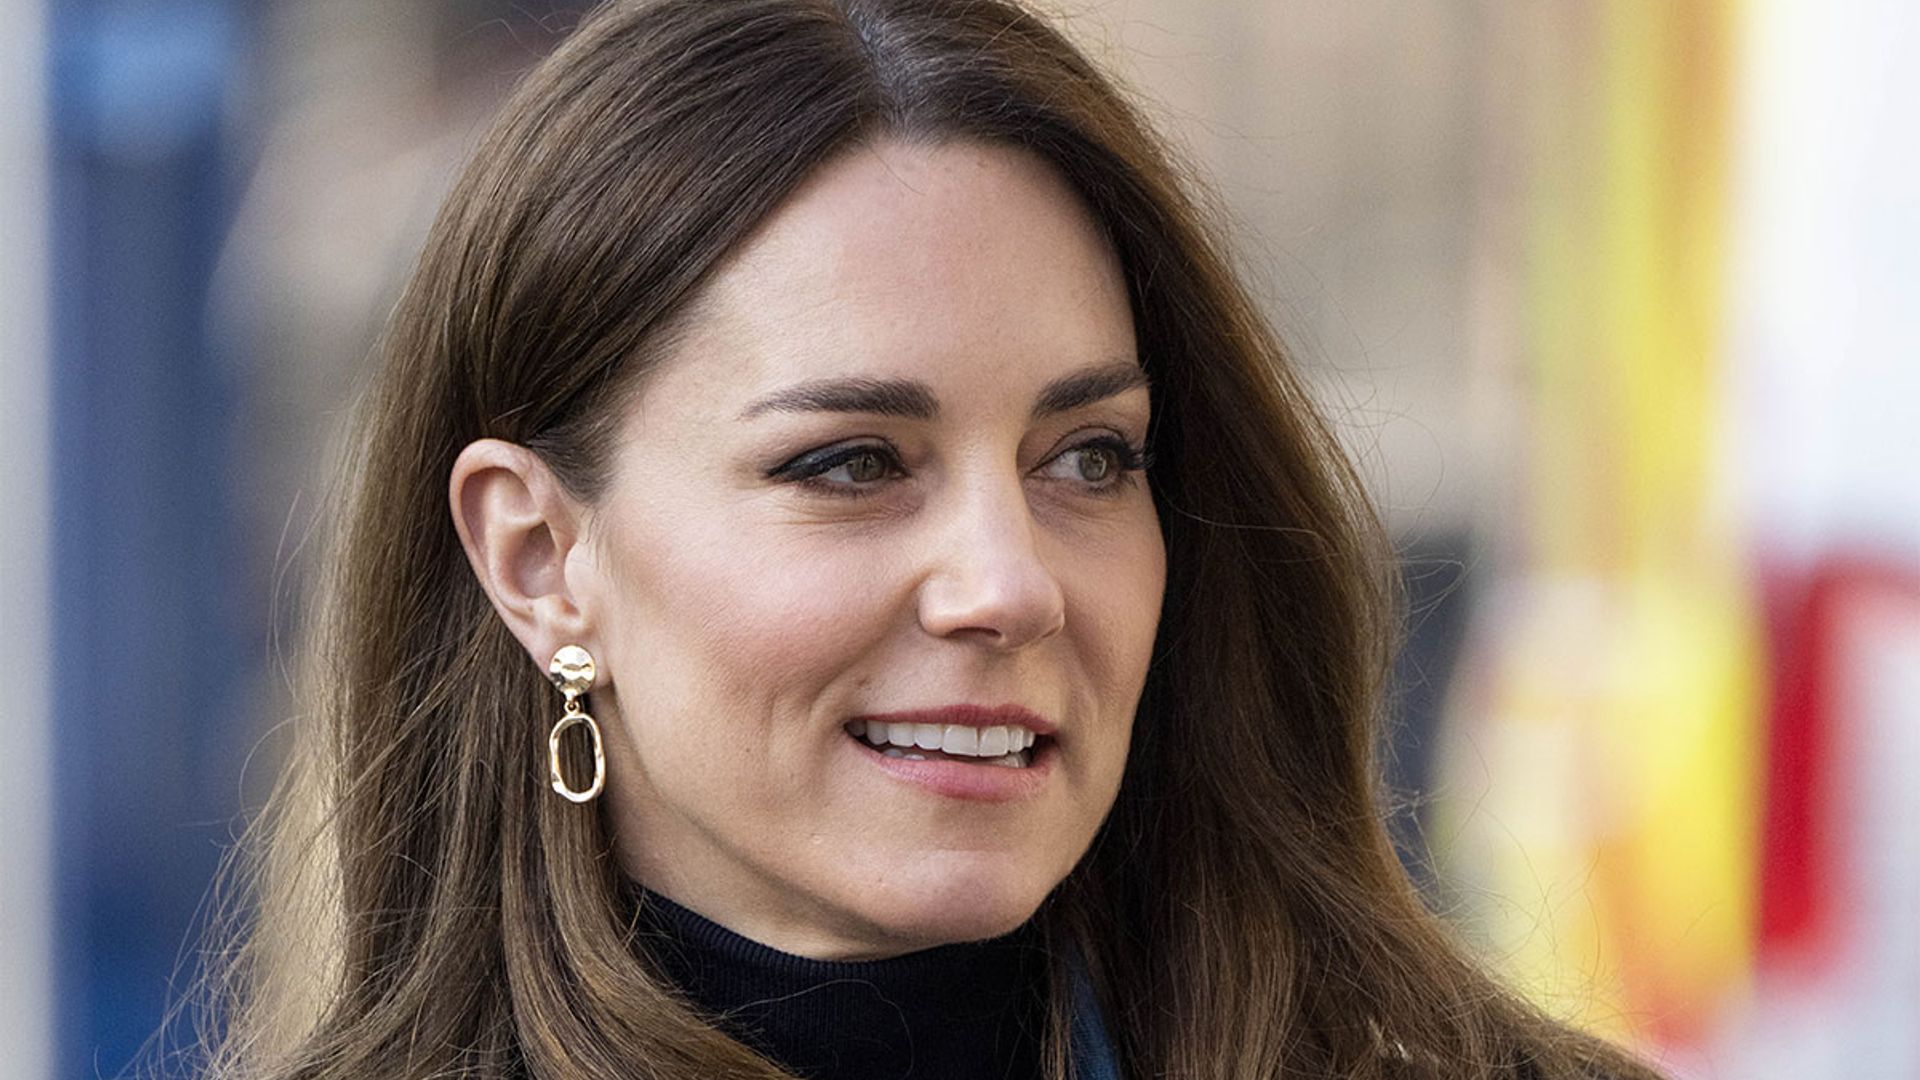 Kate Middleton sports vampy hair makeover AND £2 gold earrings | HELLO!